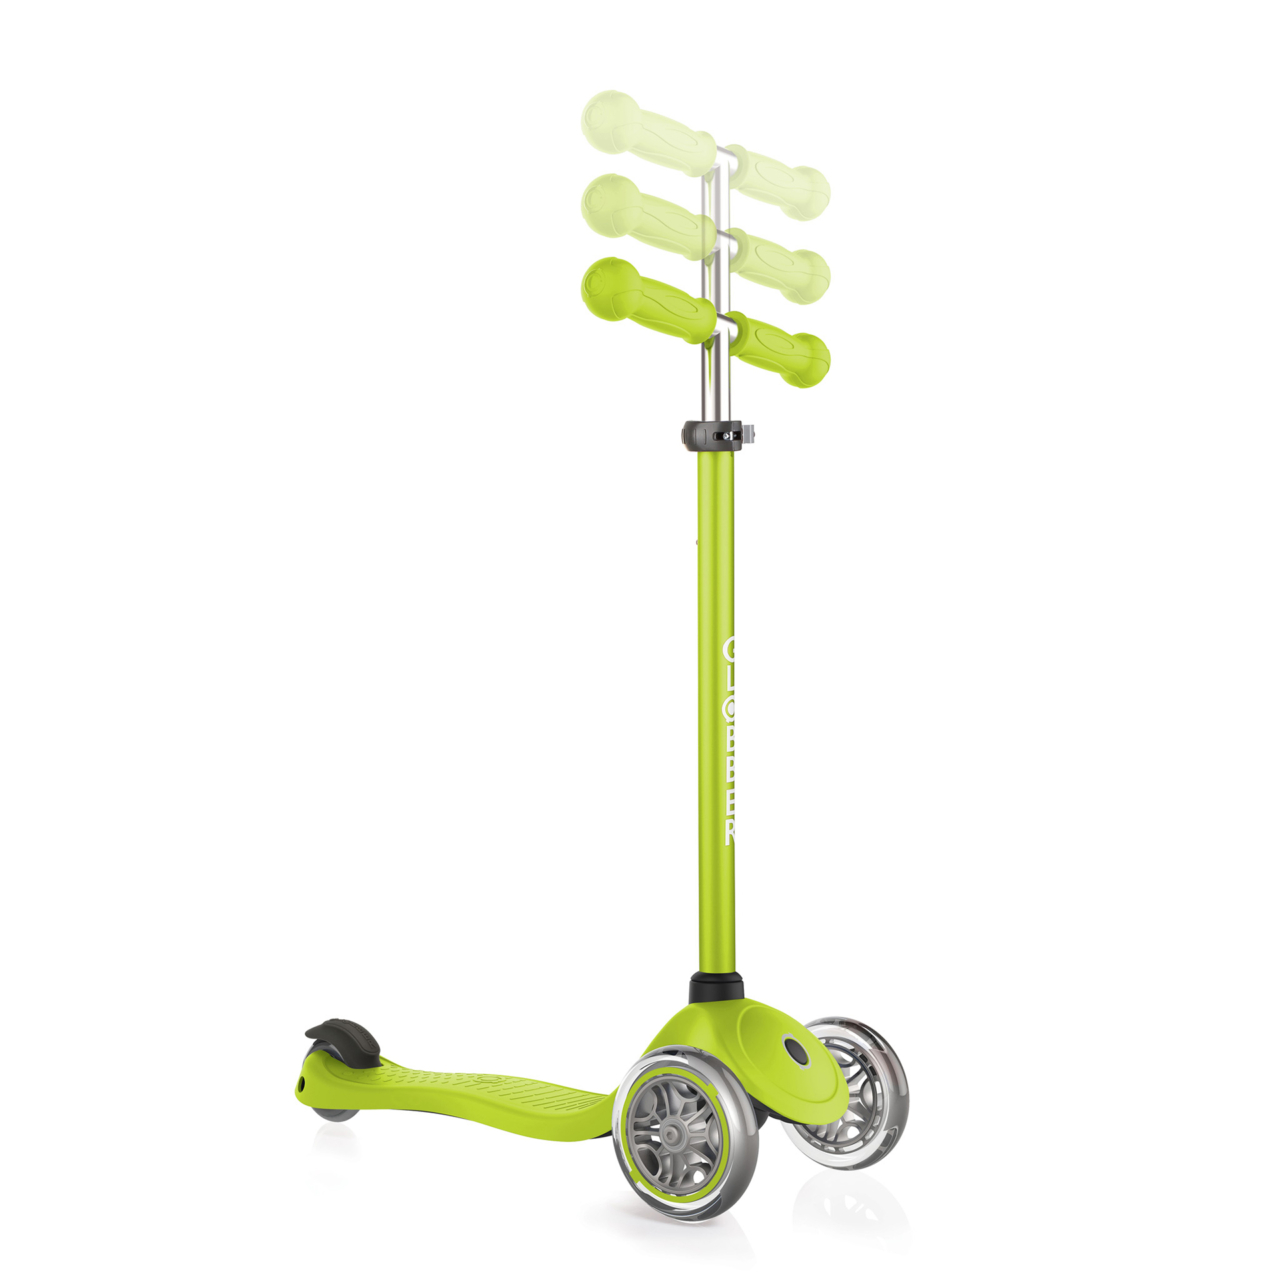 422 106 3 Adjustable Scooter For 3 Year Olds